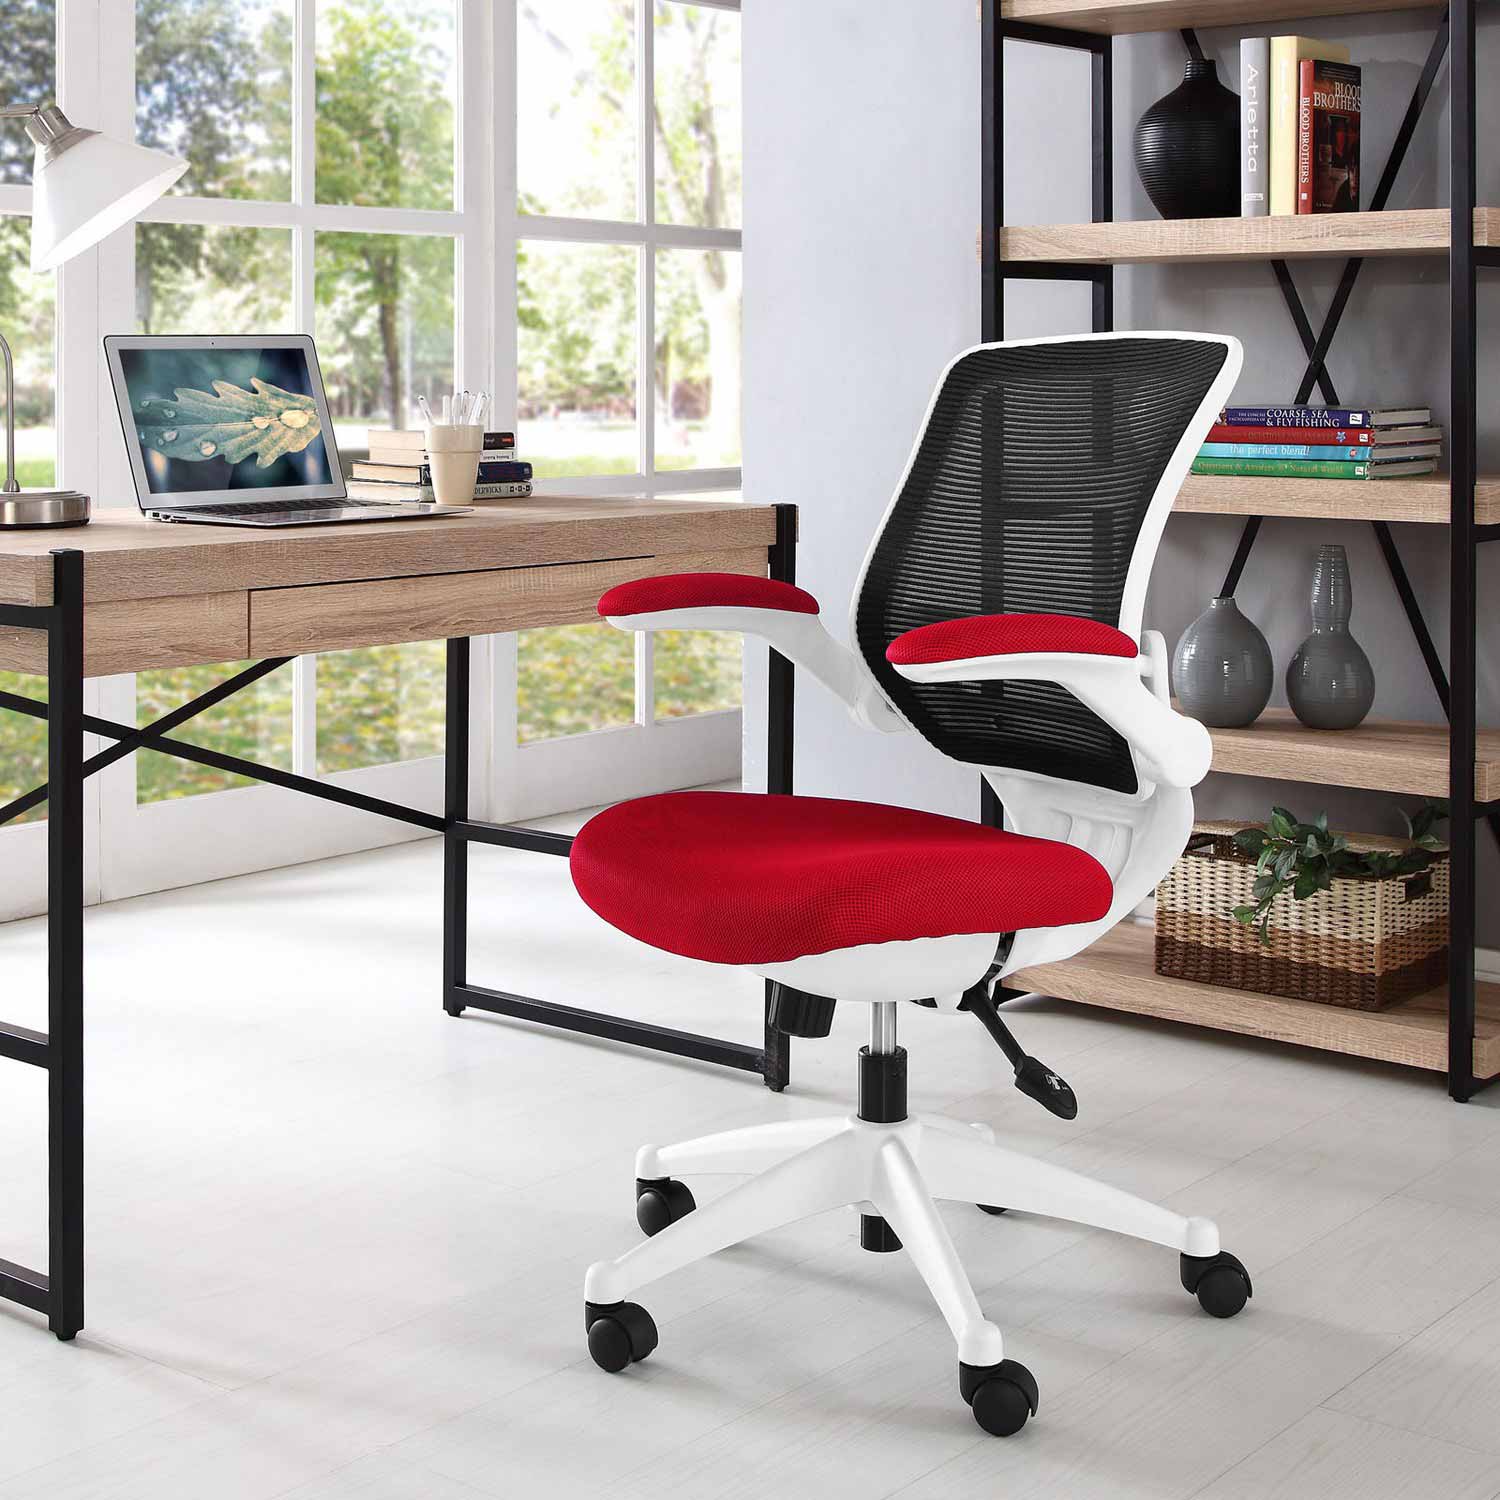 Modway Edge White Base Office Chair - Red